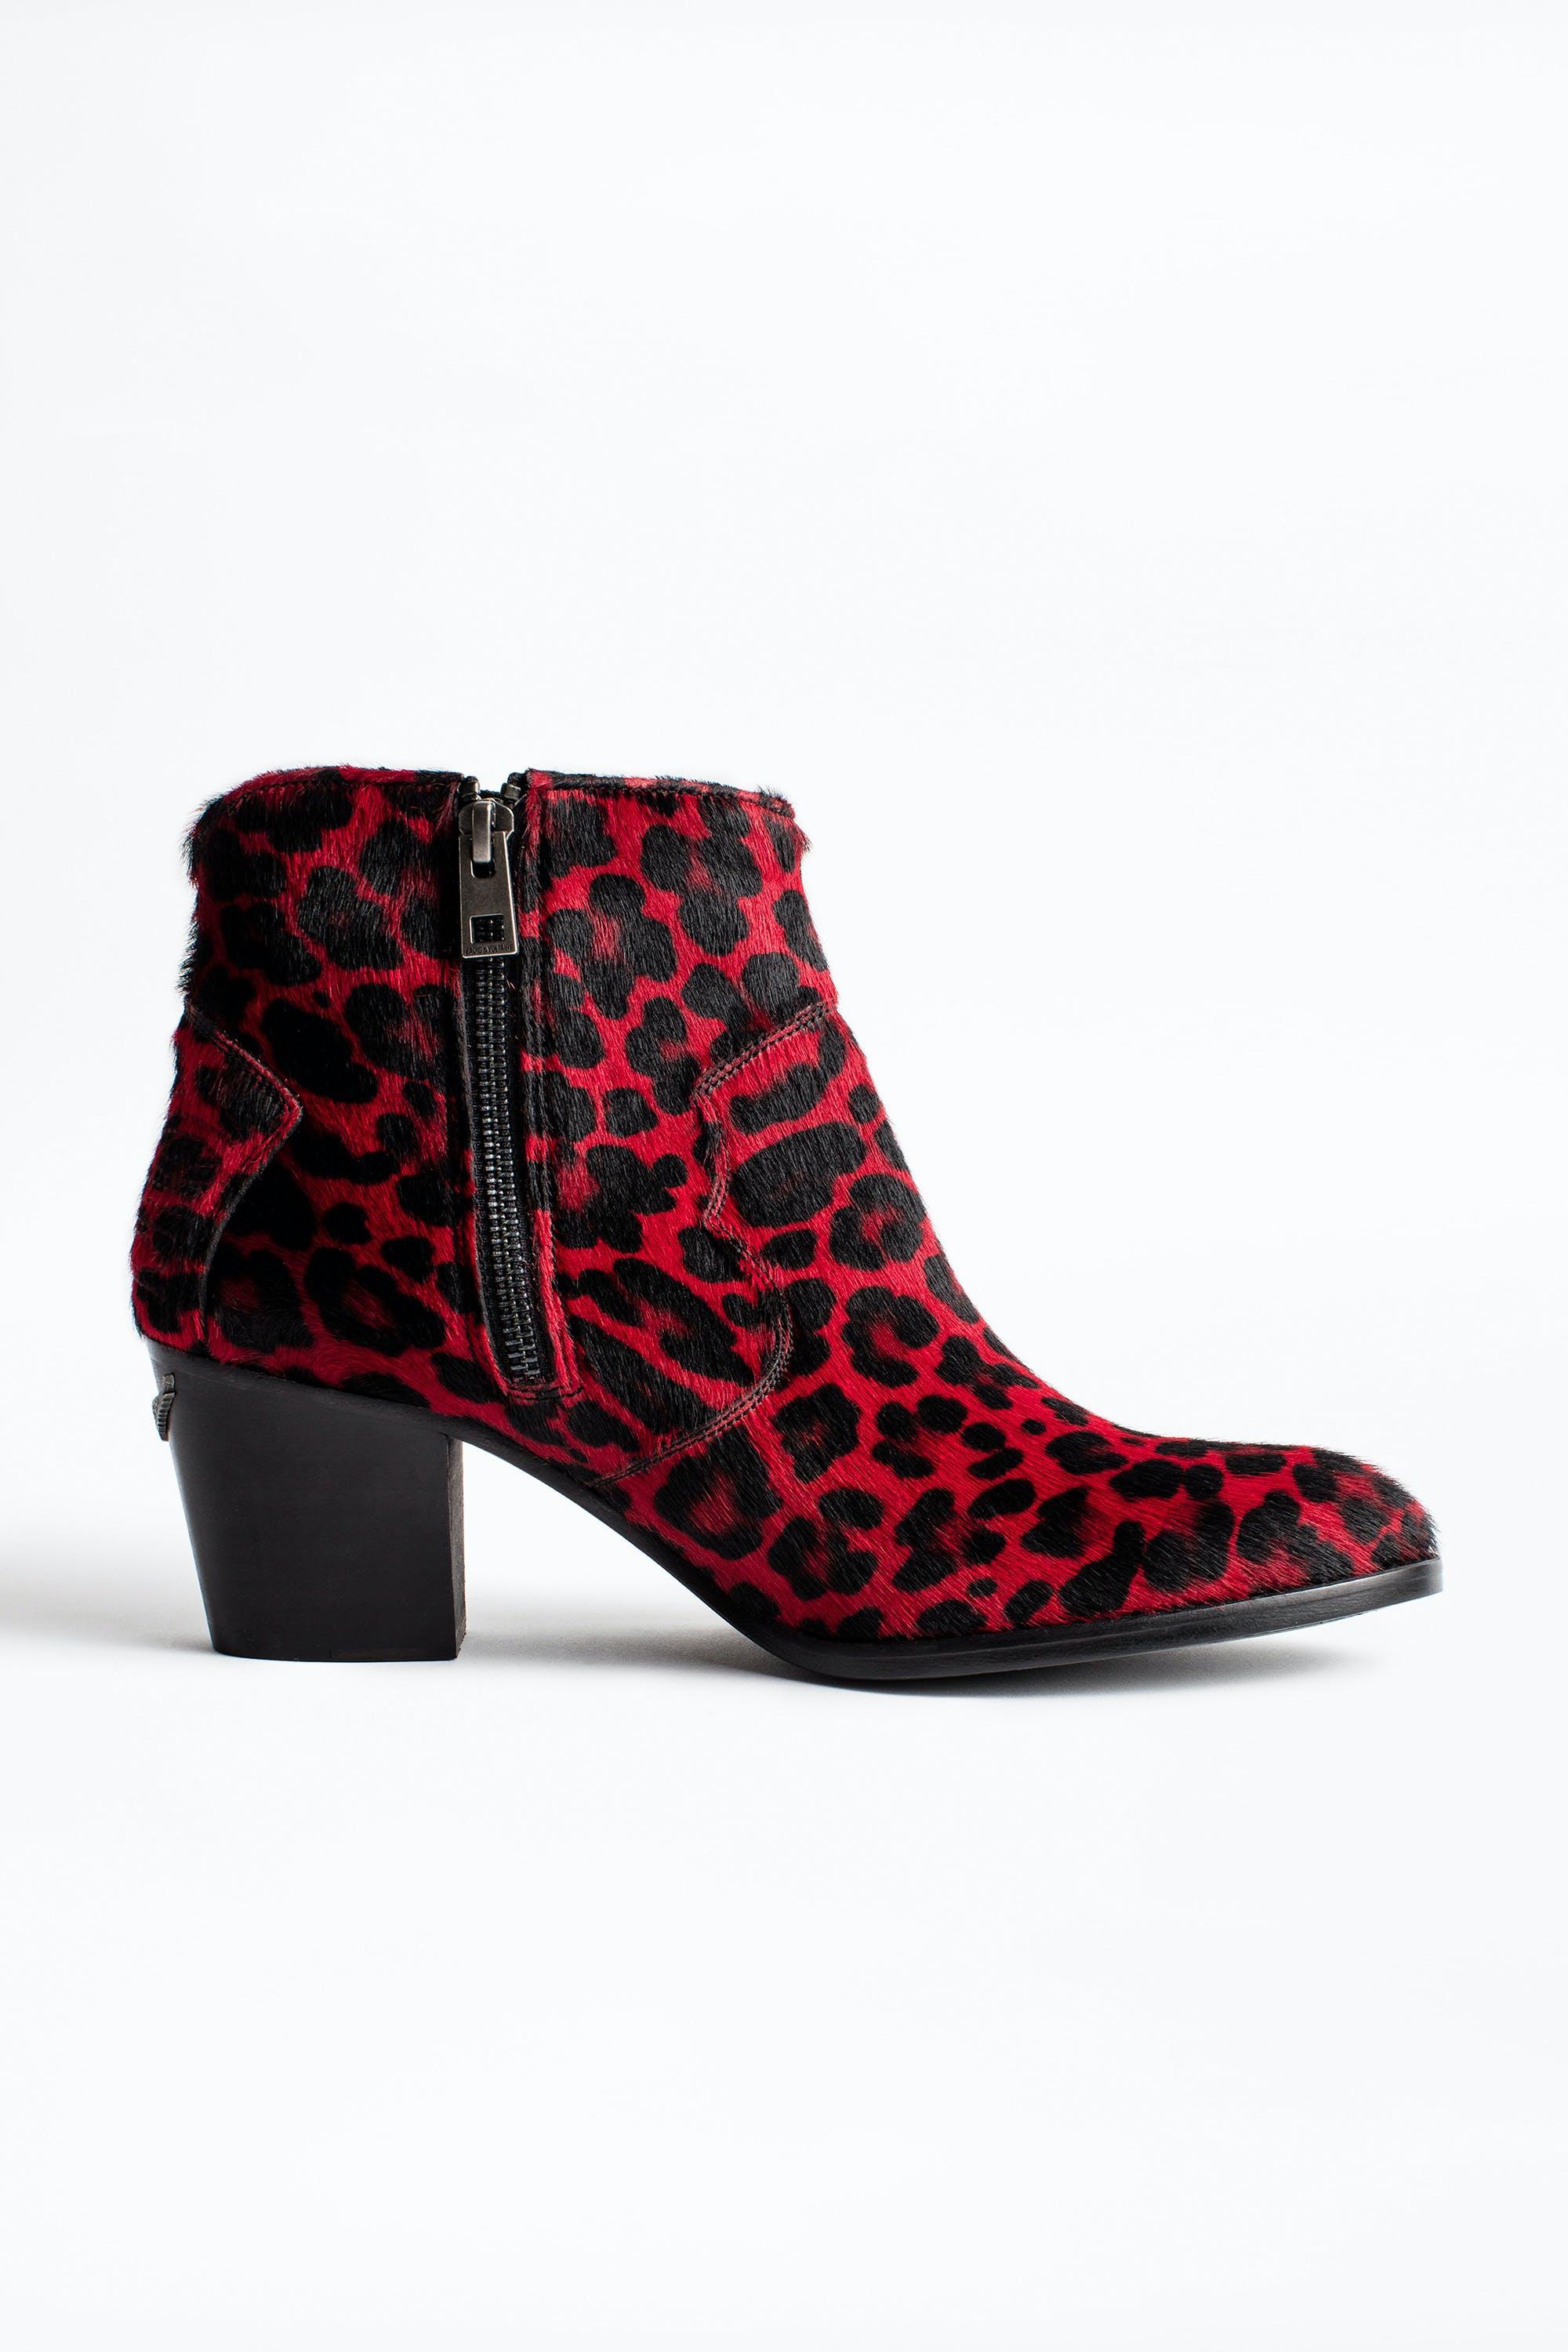 Zadig & Voltaire Leather Molly Leo Ankle Boots in Red | Lyst